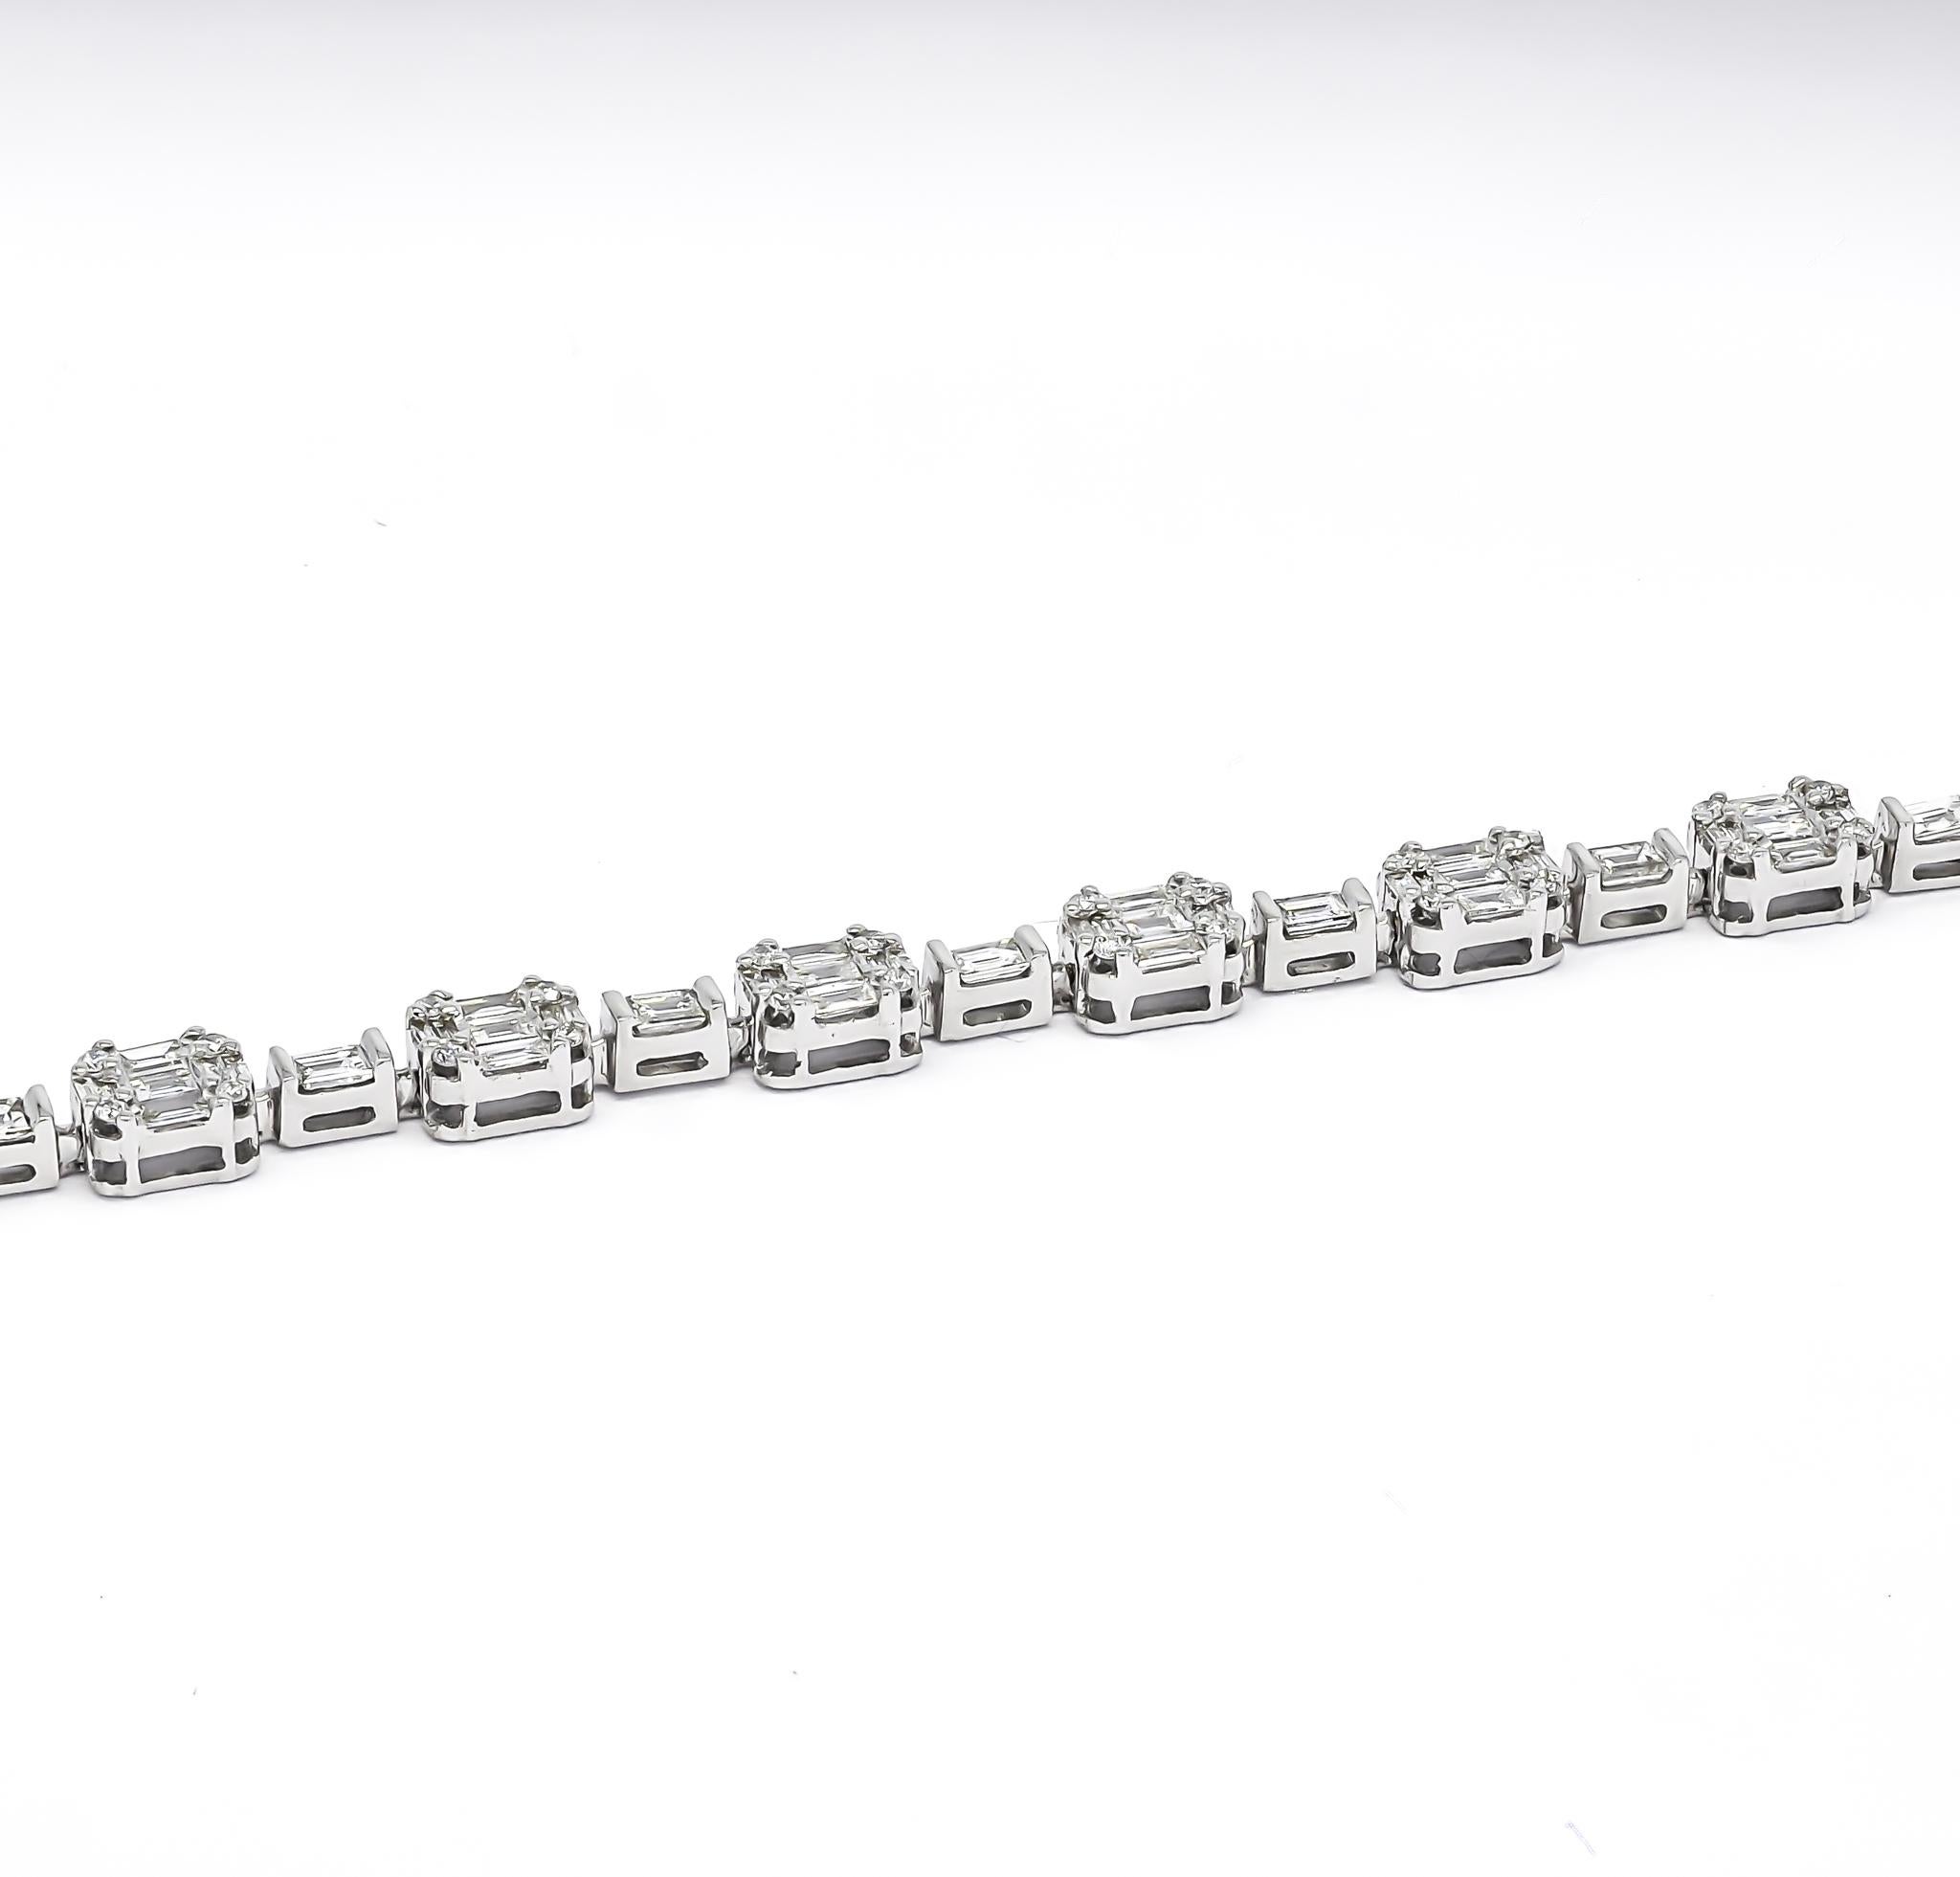 The bracelet showcases an exquisite interplay between the clean lines of the baguette diamonds and the scintillating brilliance of the round diamonds, creating a stunning visual effect that's both modern and timeless. The baguette diamonds form a